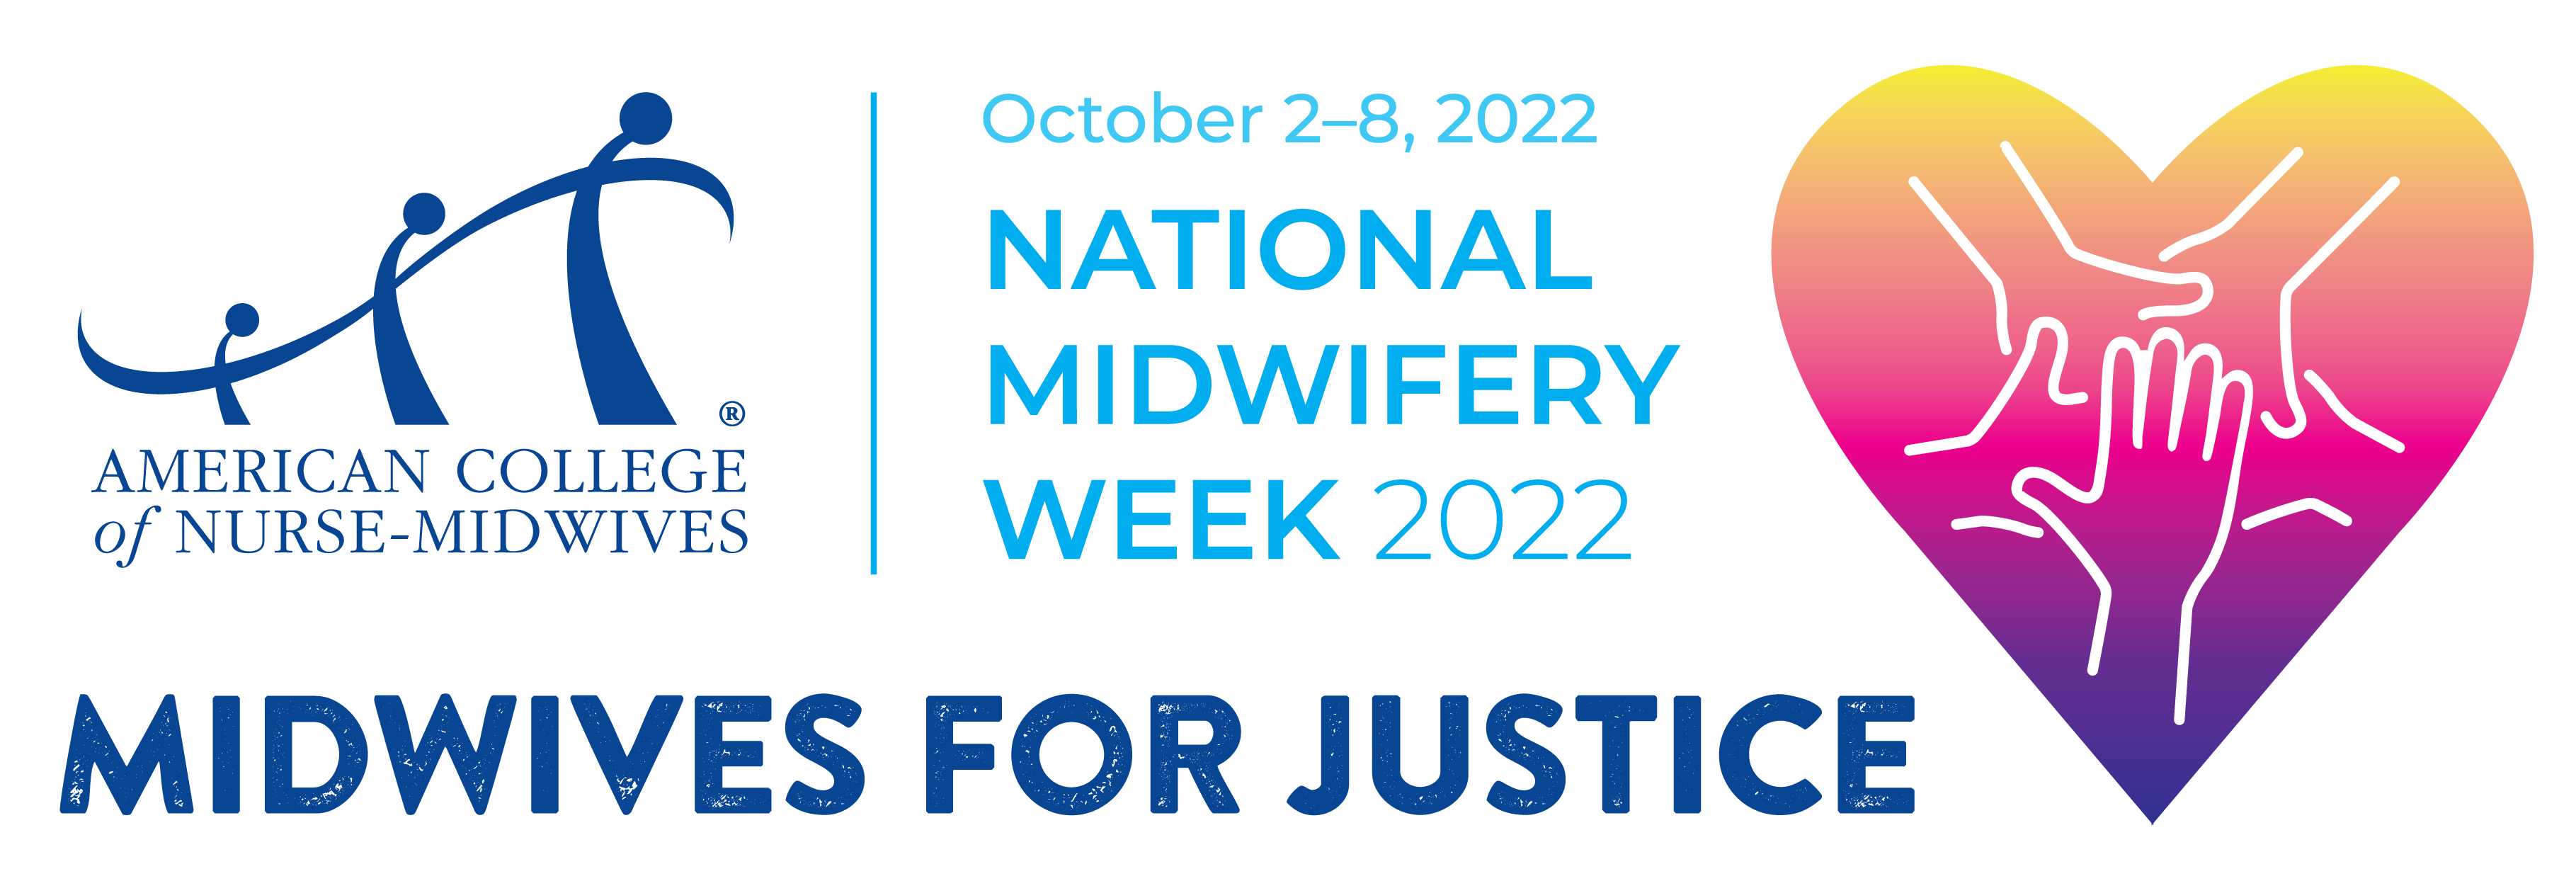 NMW2022 - Midwives for Justice Logo - Horizontal - Transparent